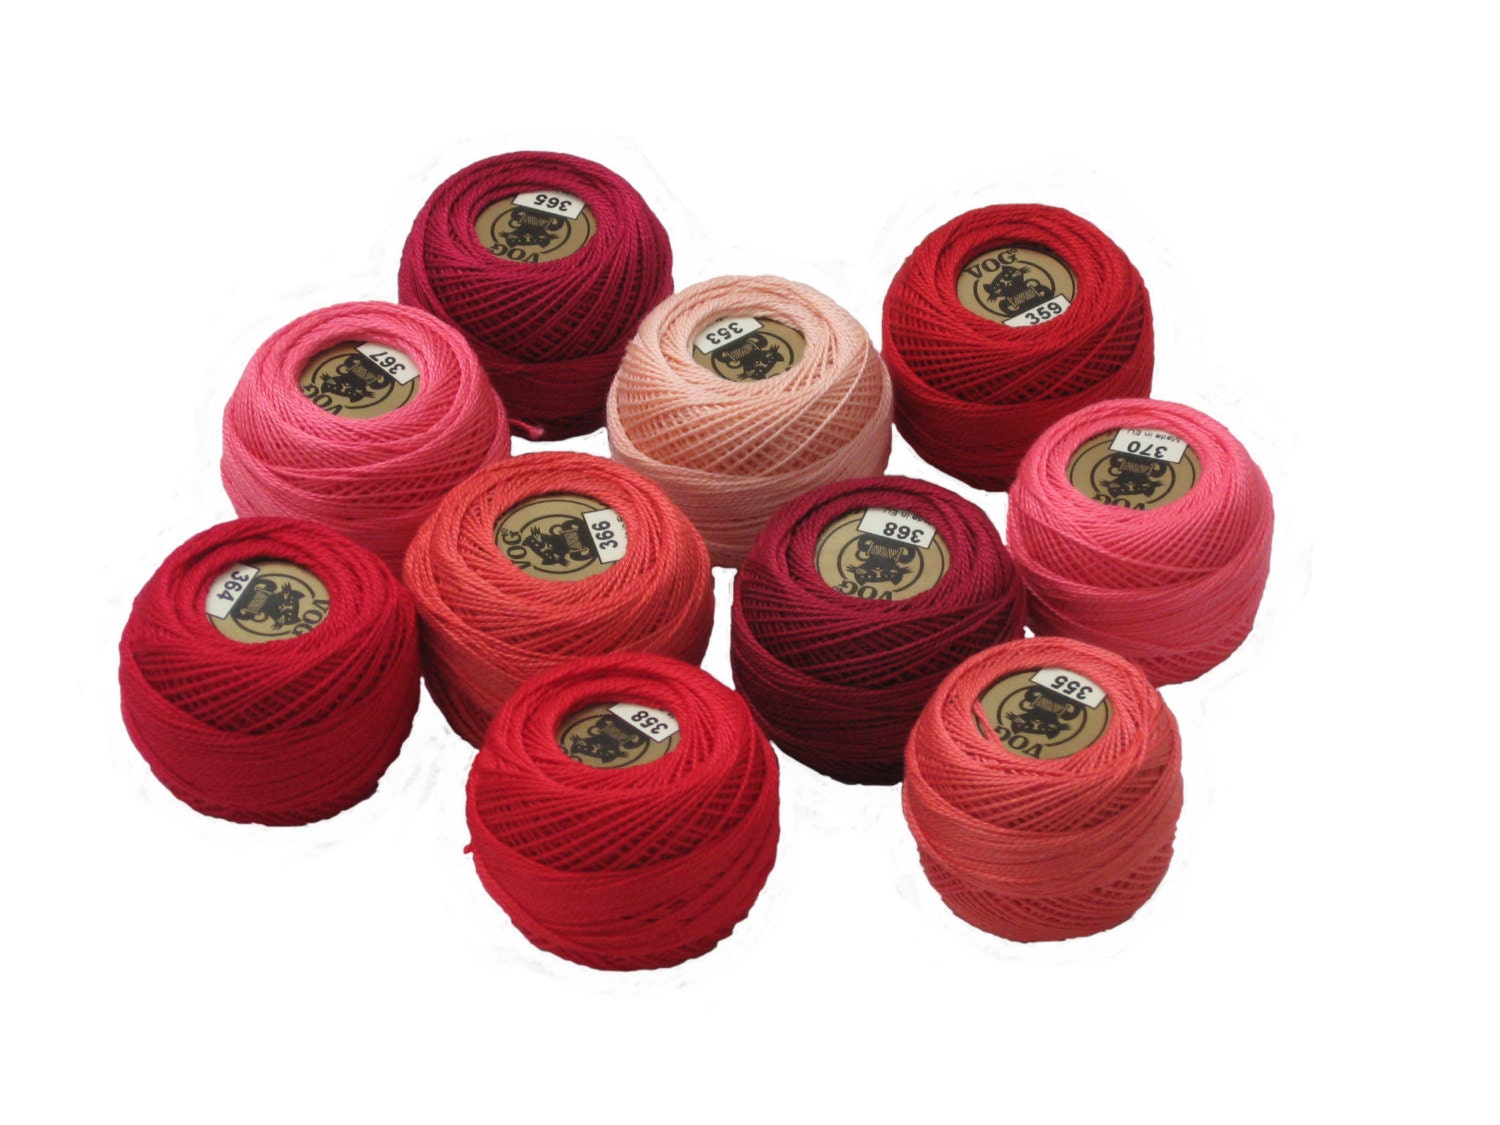 Vog© Perle Cotton Size 8 Embroidery Threads - Set of 10 Balls (10gr Each) -  Pink, Purple and Blue Shades (Set No. 1)